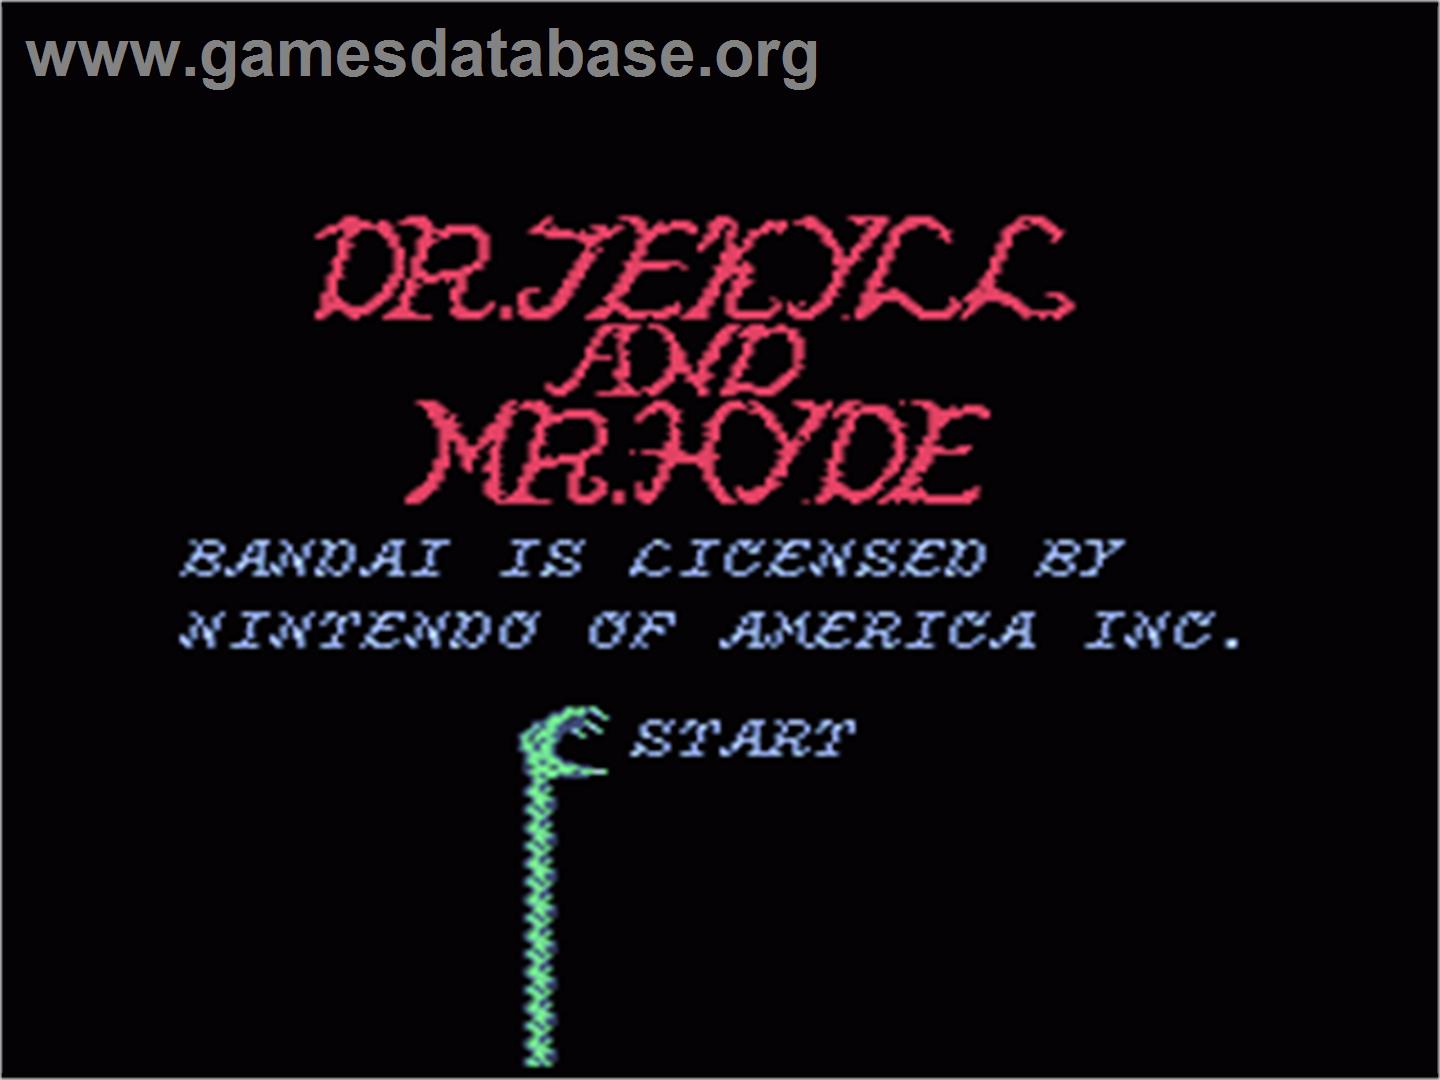 Dr. Jekyll and Mr. Hyde - Nintendo NES - Artwork - Title Screen